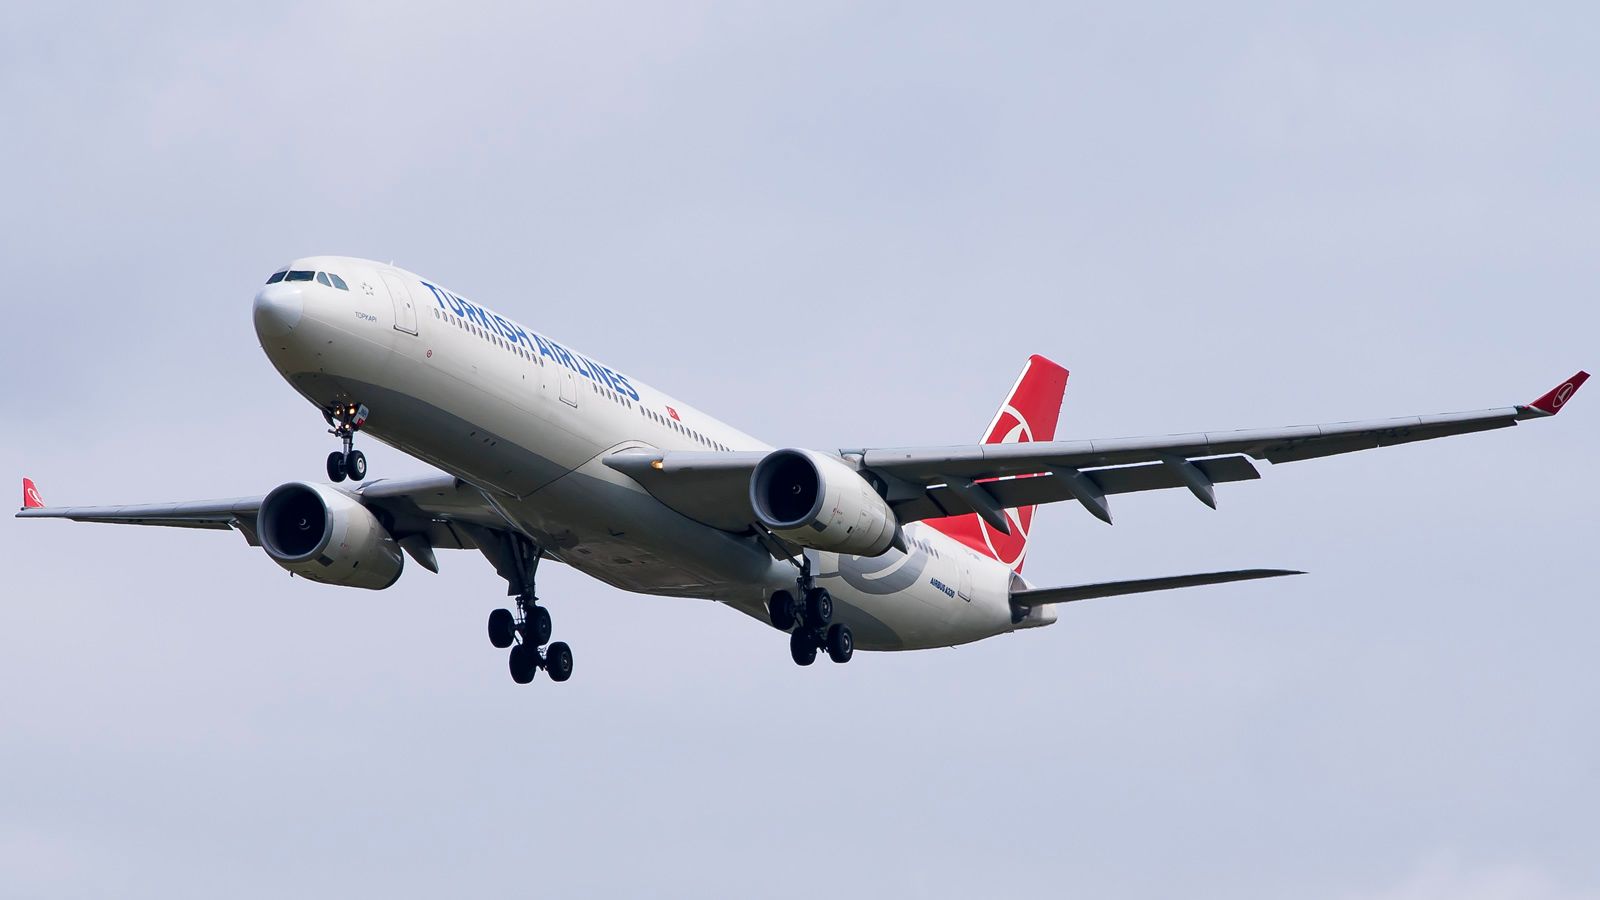 Turkish Airlines A330-300 landing